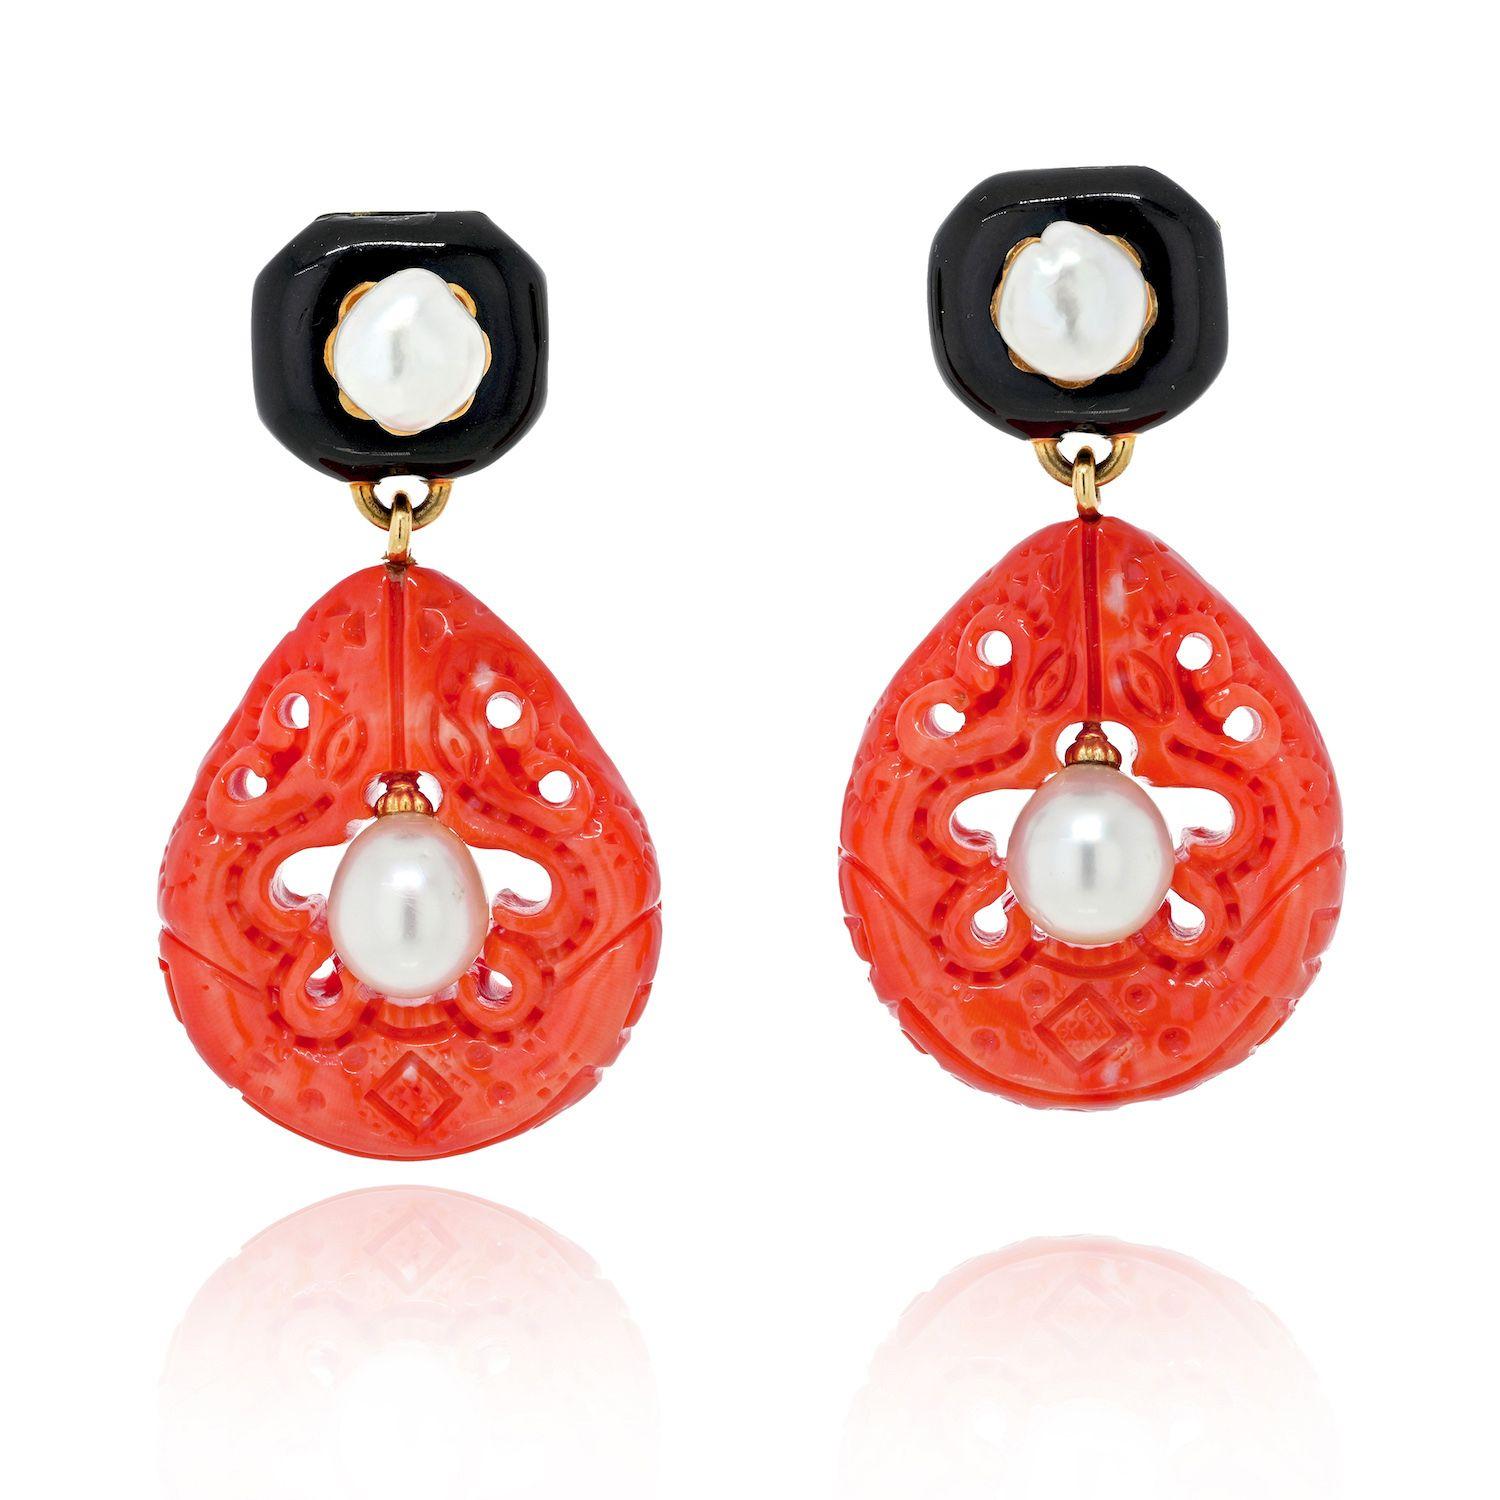 The surmounts set with two semi-baroque cultured pearls within black enameled frames, suspending carved corals centering drop-shaped cultured pearls.
Length: 2 3/8 inches. 
The coral is medium orange-pink, with a few areas of whitish mottling and